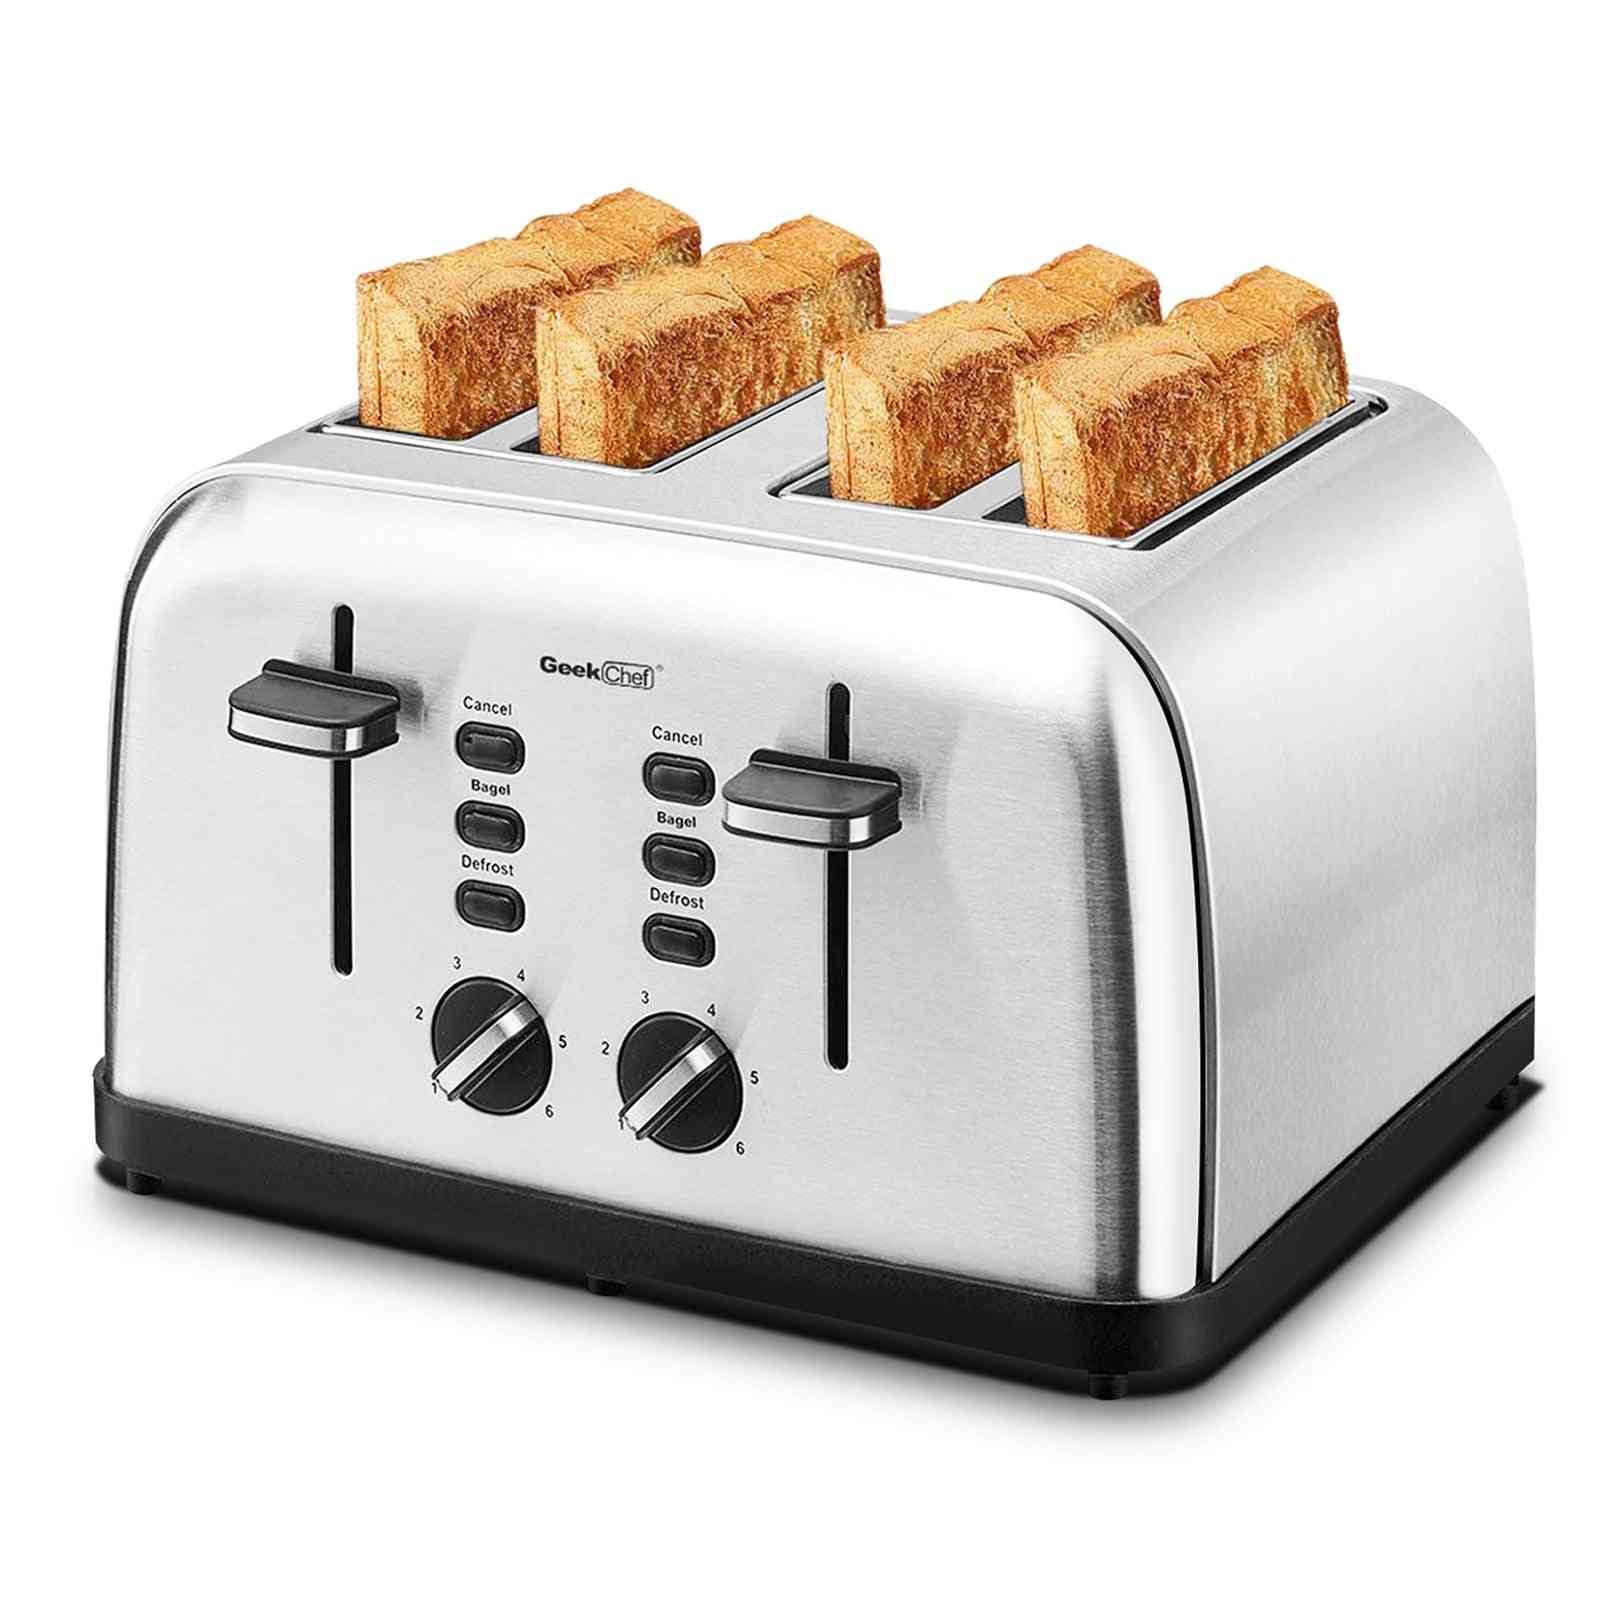 Stainless Steel Extra-wide Geek Chef 4 Slice Toaster